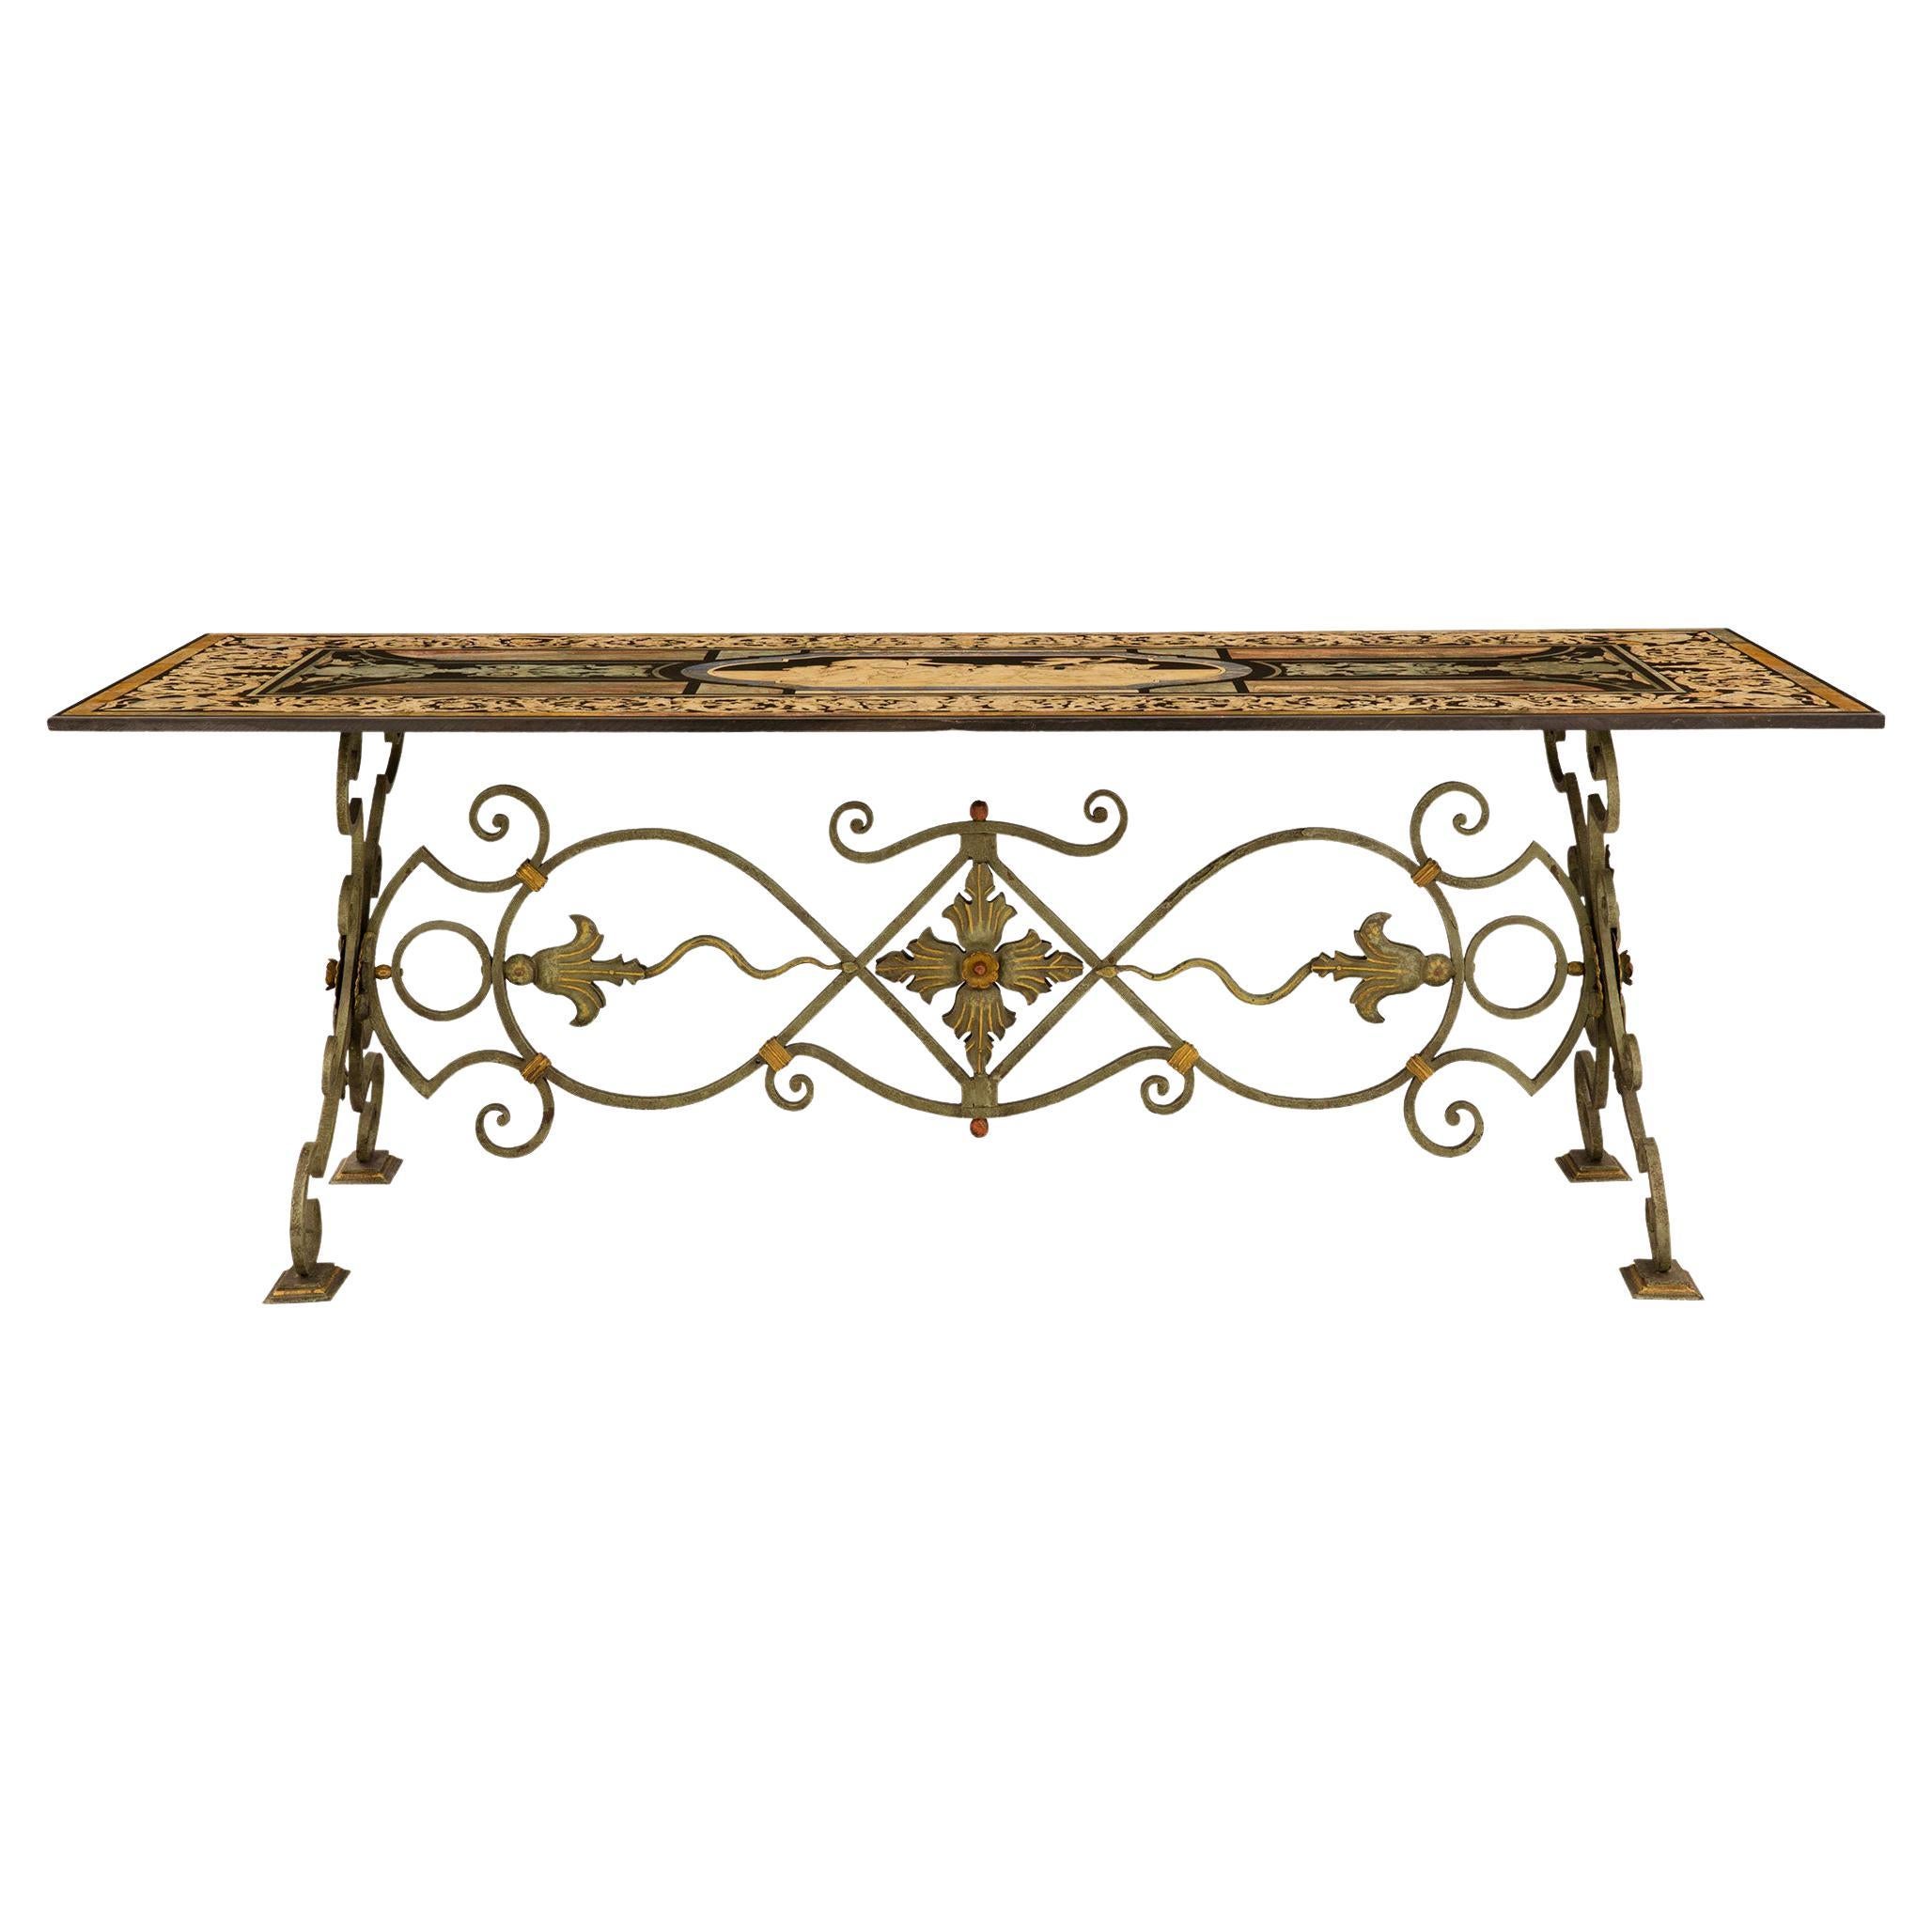 Italian 19th Century Wrought Iron, Gilt and Scagliola Center/Dining Table